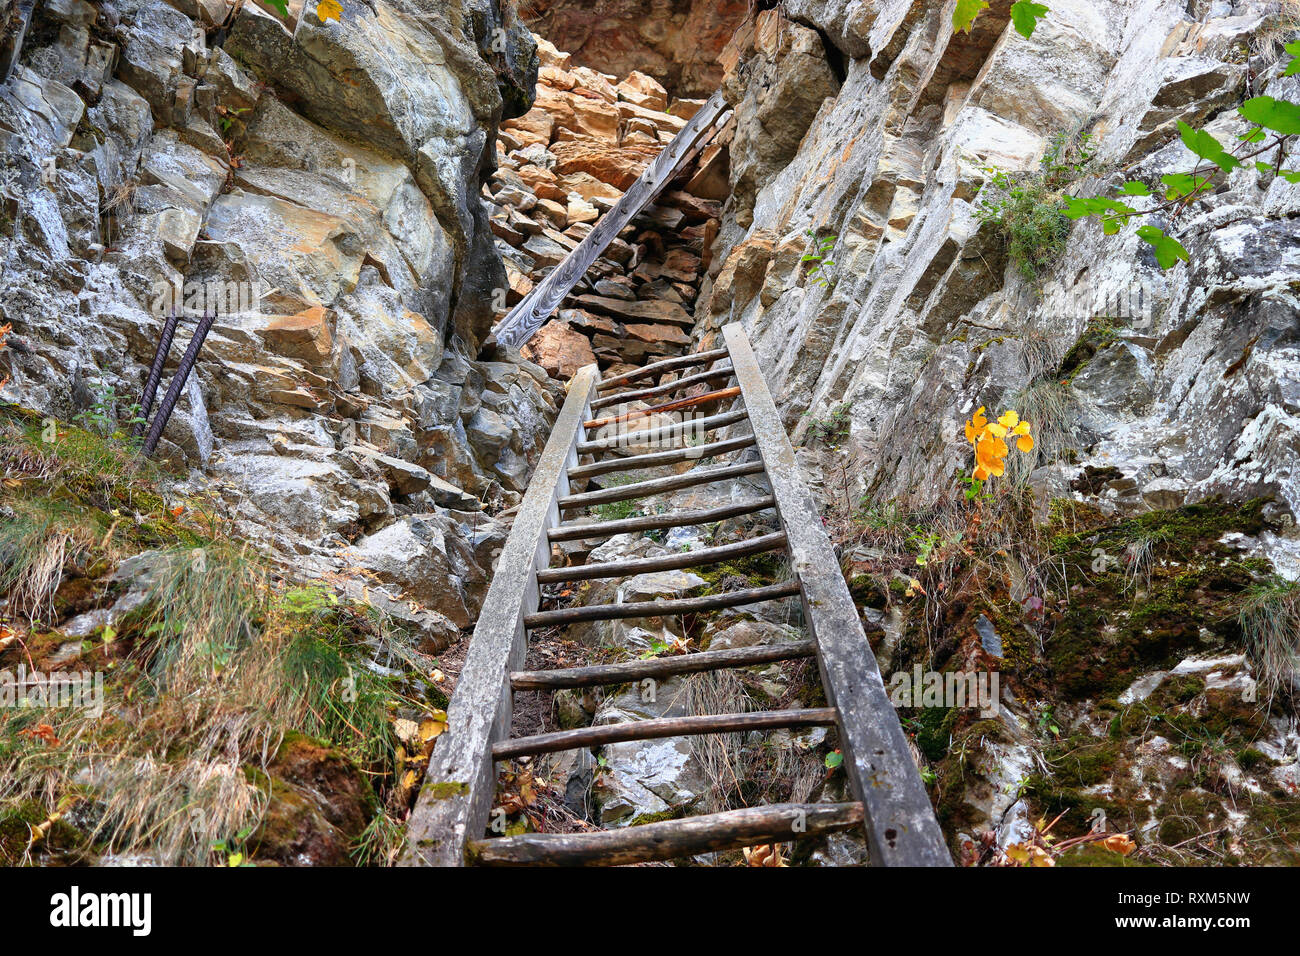 LEUKERBAD, VALAIS, SWITZERLAND - OCTOBER 11, 2018: The dramatic Albinen ladders. Historical trade route between the villages of Albinen and Leukerbad Stock Photo